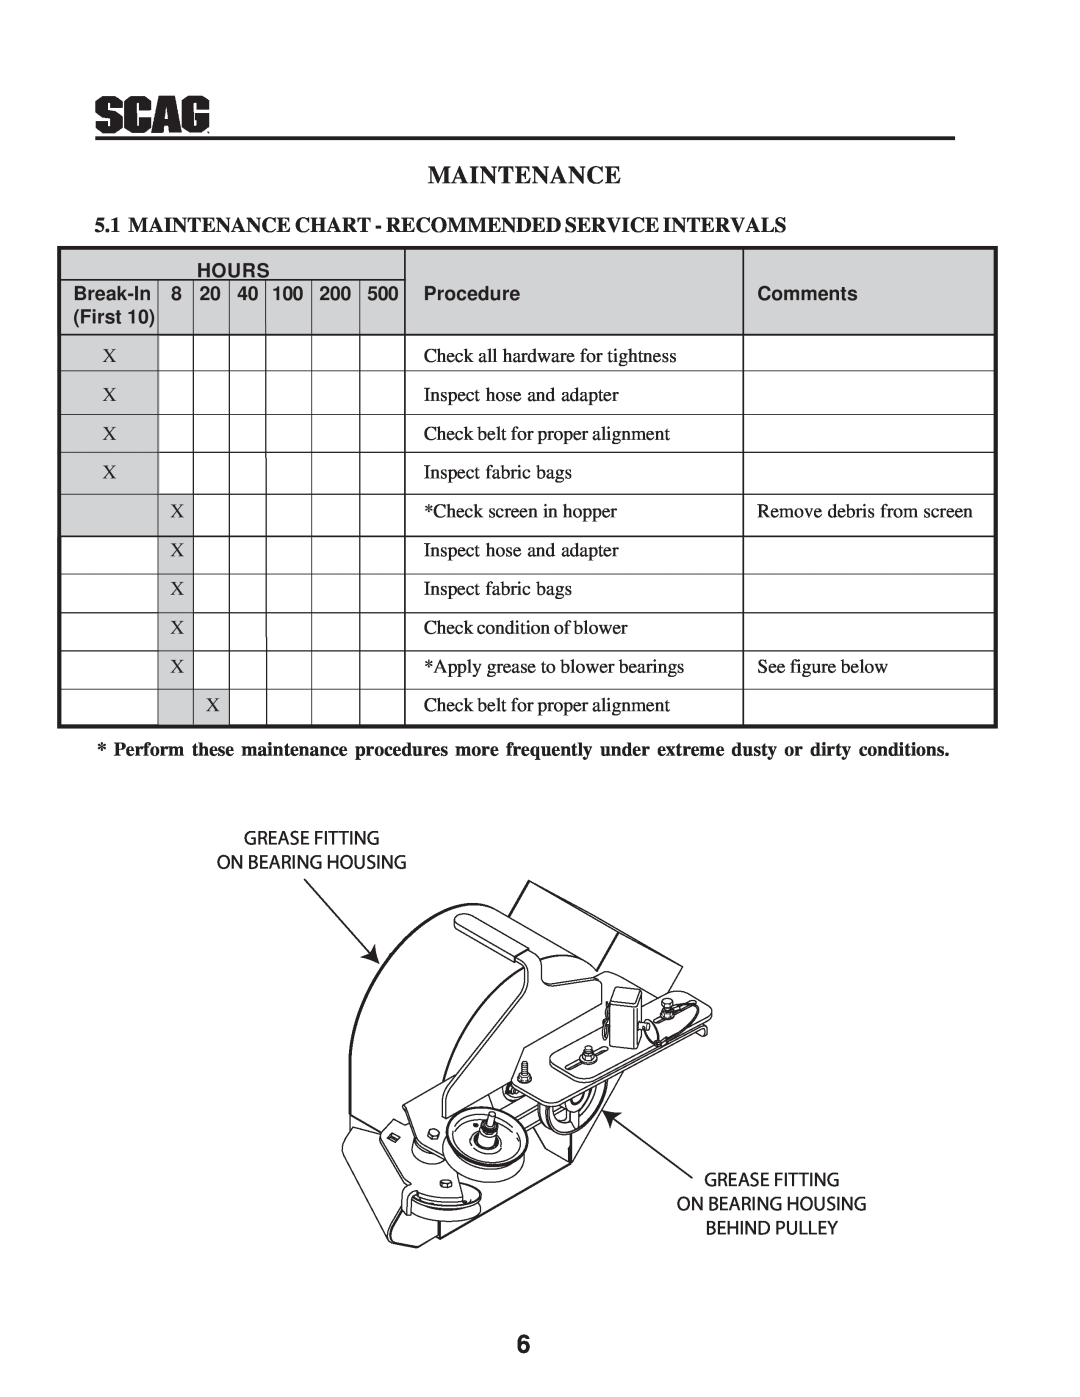 Scag Power Equipment GC-STC-V Maintenance Chart - Recommended Service Intervals, Hours, Break-In, Procedure, Comments 